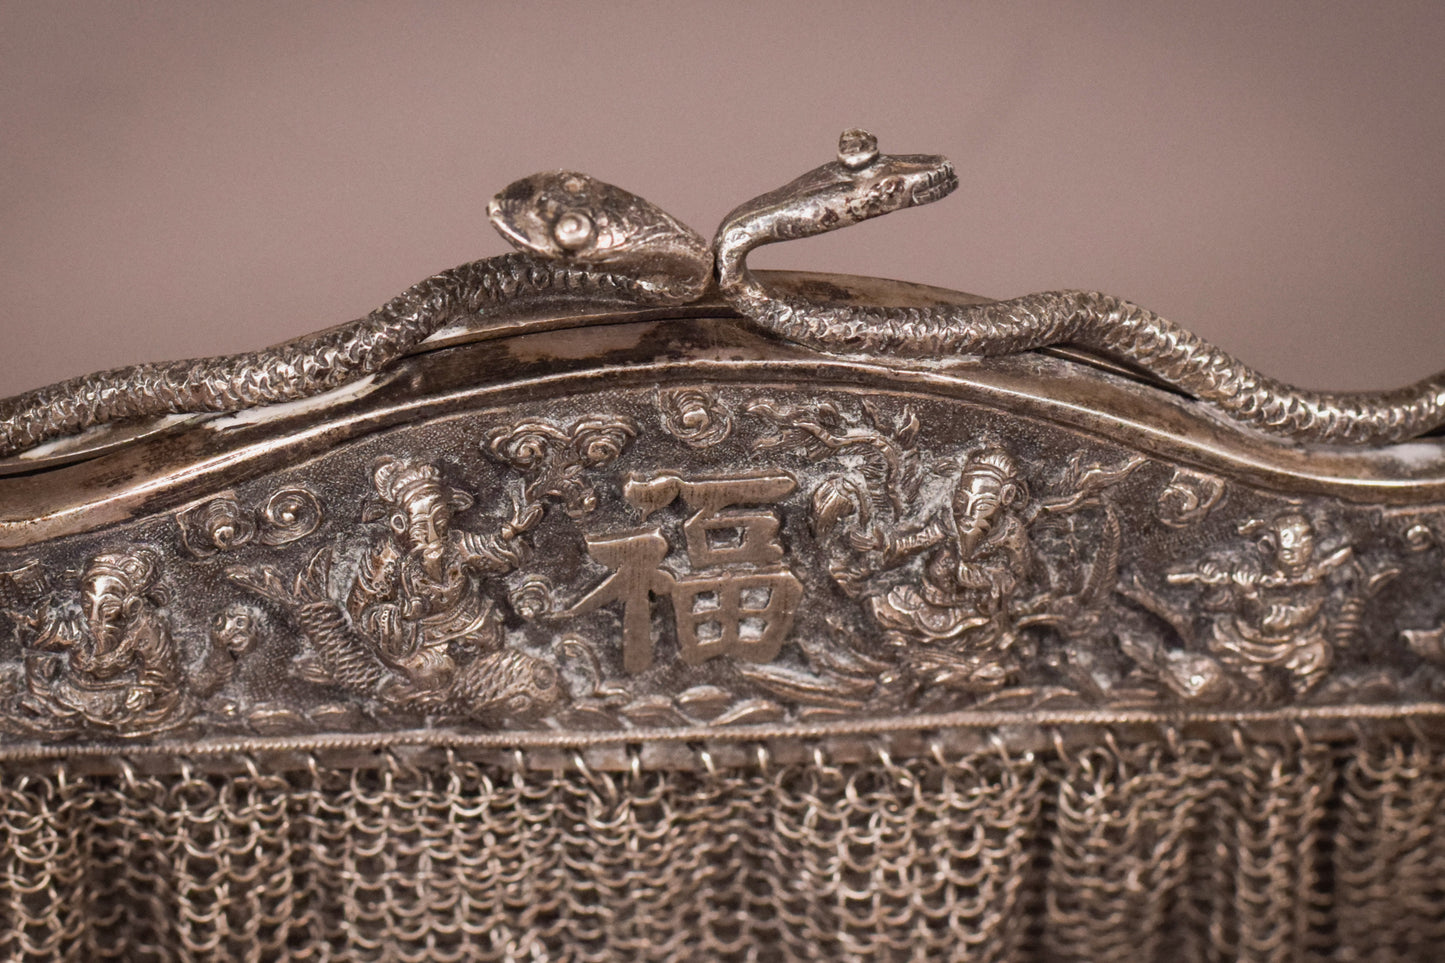 Chinese Silver Purses x2 plus Silver Parasol handle